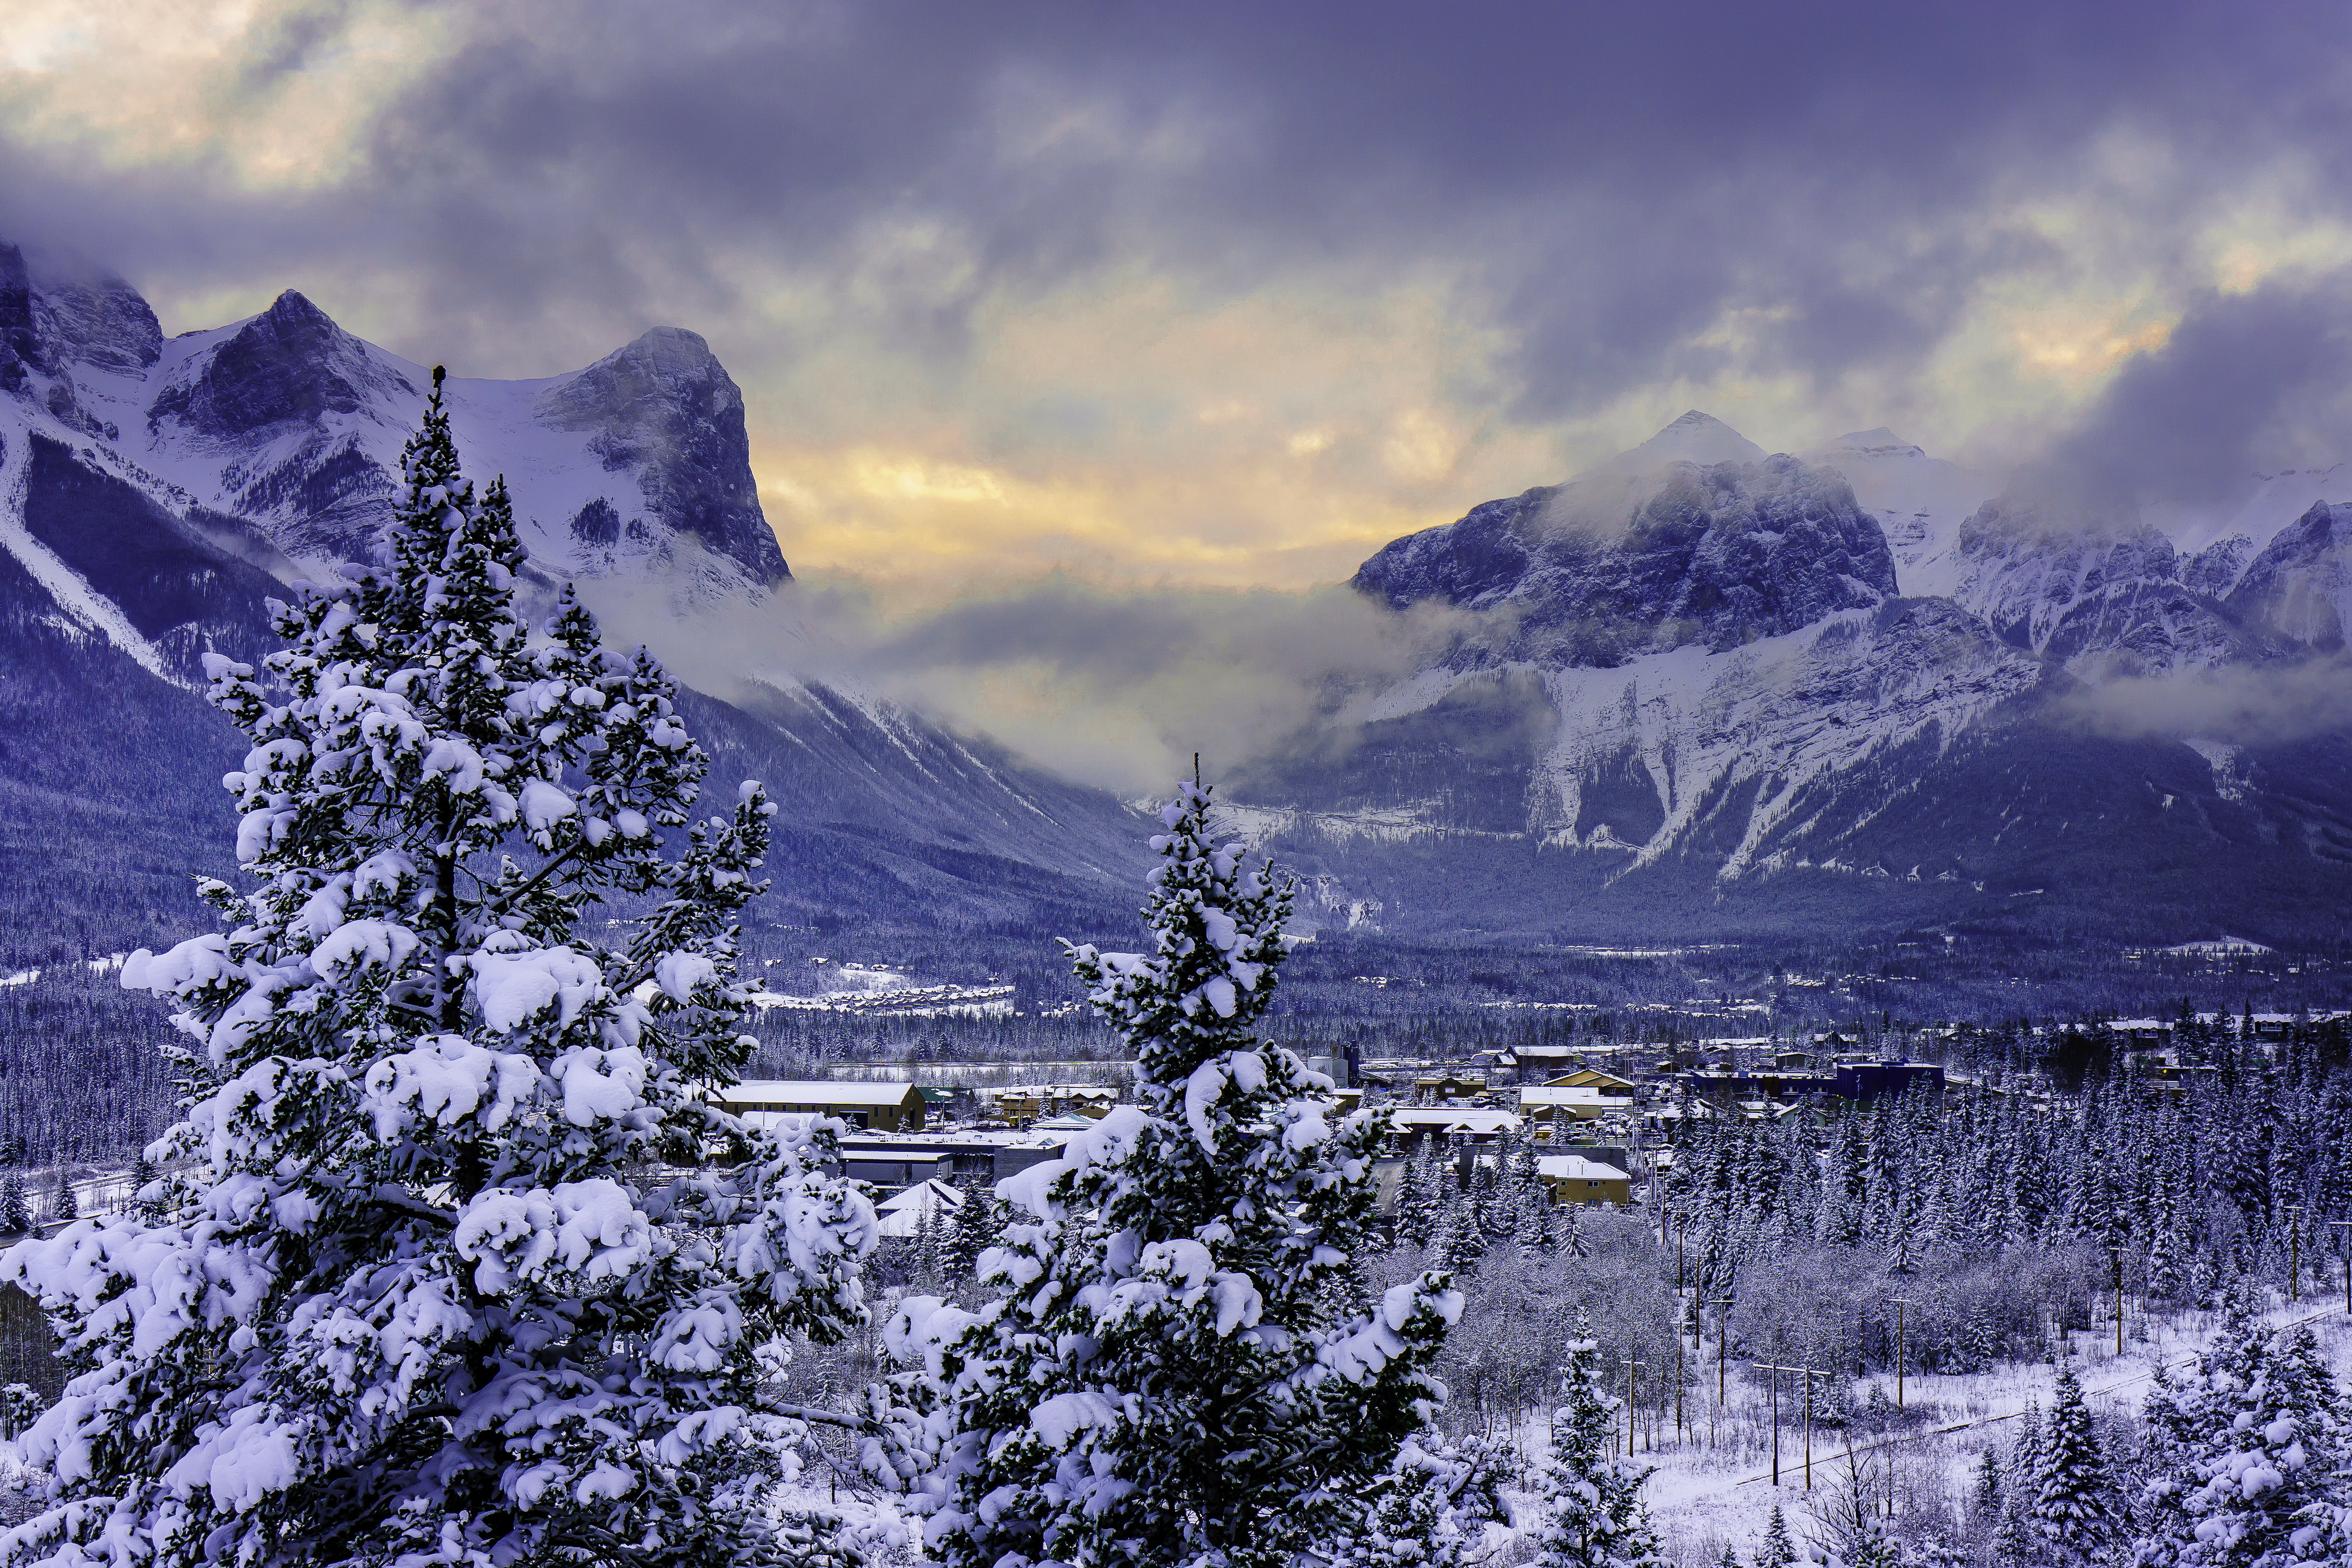 131772 download wallpaper winter, nature, mountains, snow, canada, alberta, albert, banff national park screensavers and pictures for free